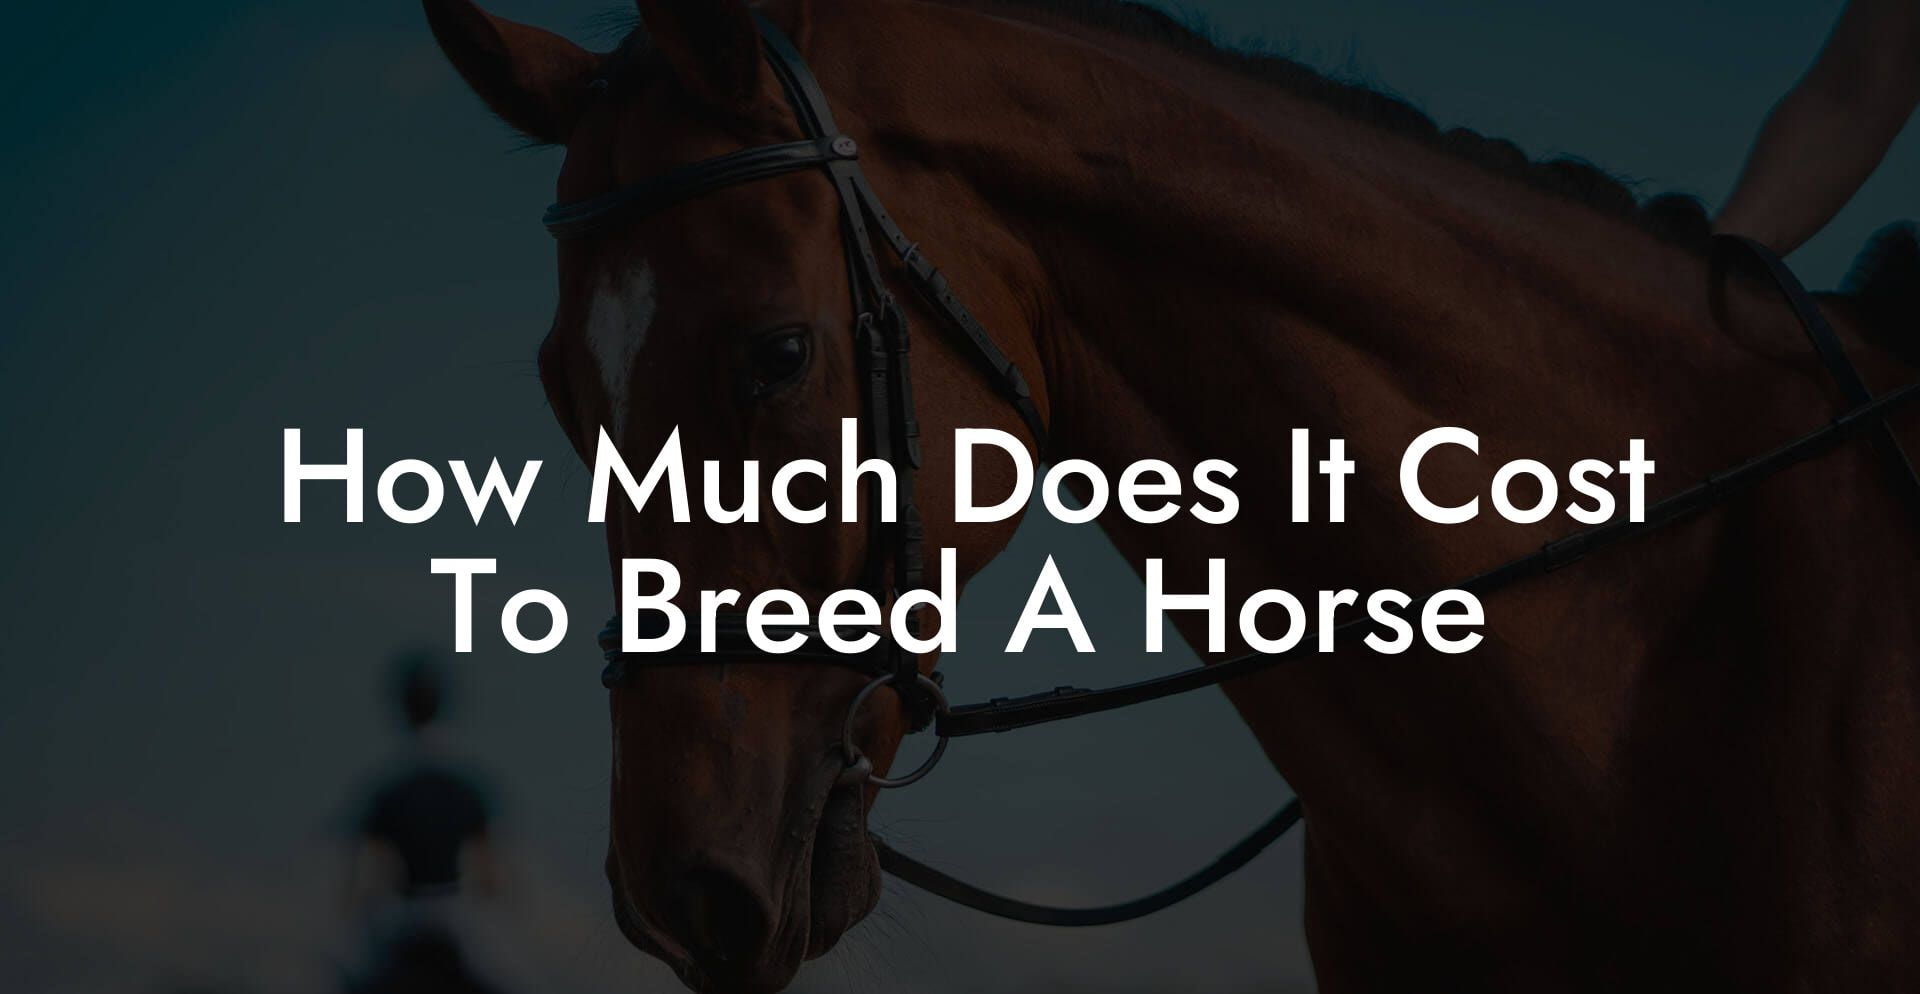 How Much Does It Cost To Breed A Horse